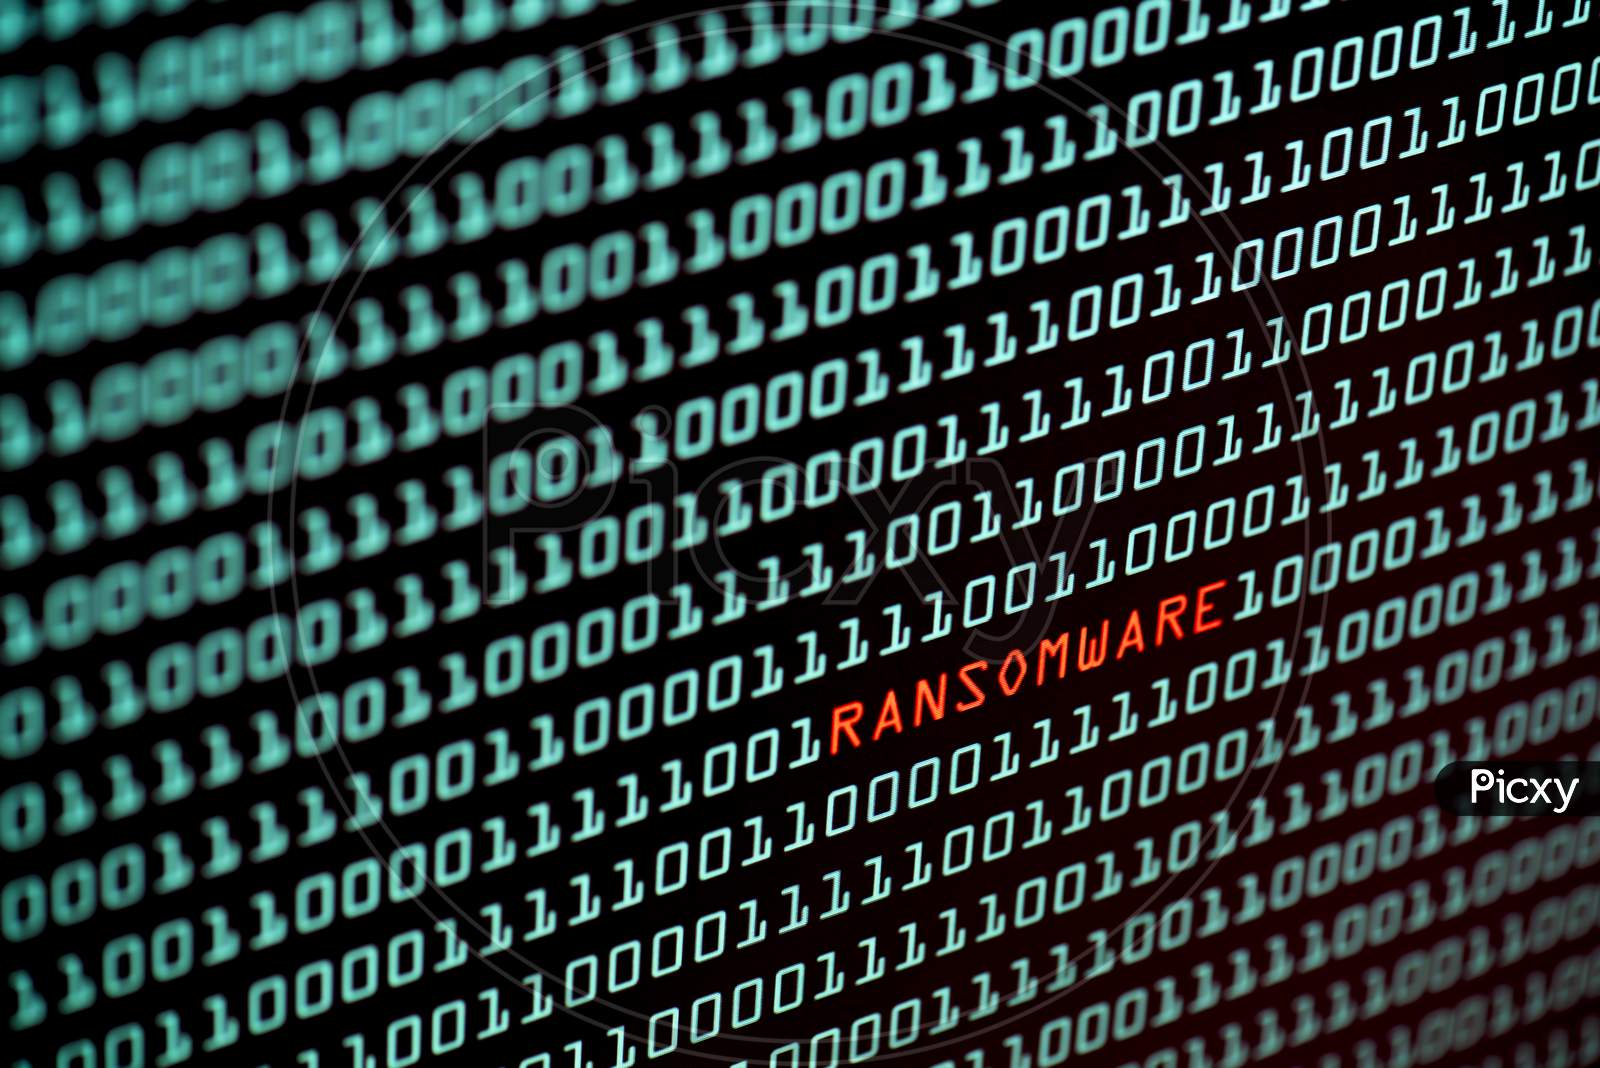 Ransomware Or Wannacry Text And Binary Code Concept From The Desktop Computer Screen, Selective Focus, Security Technology Concept, Hacker Concept